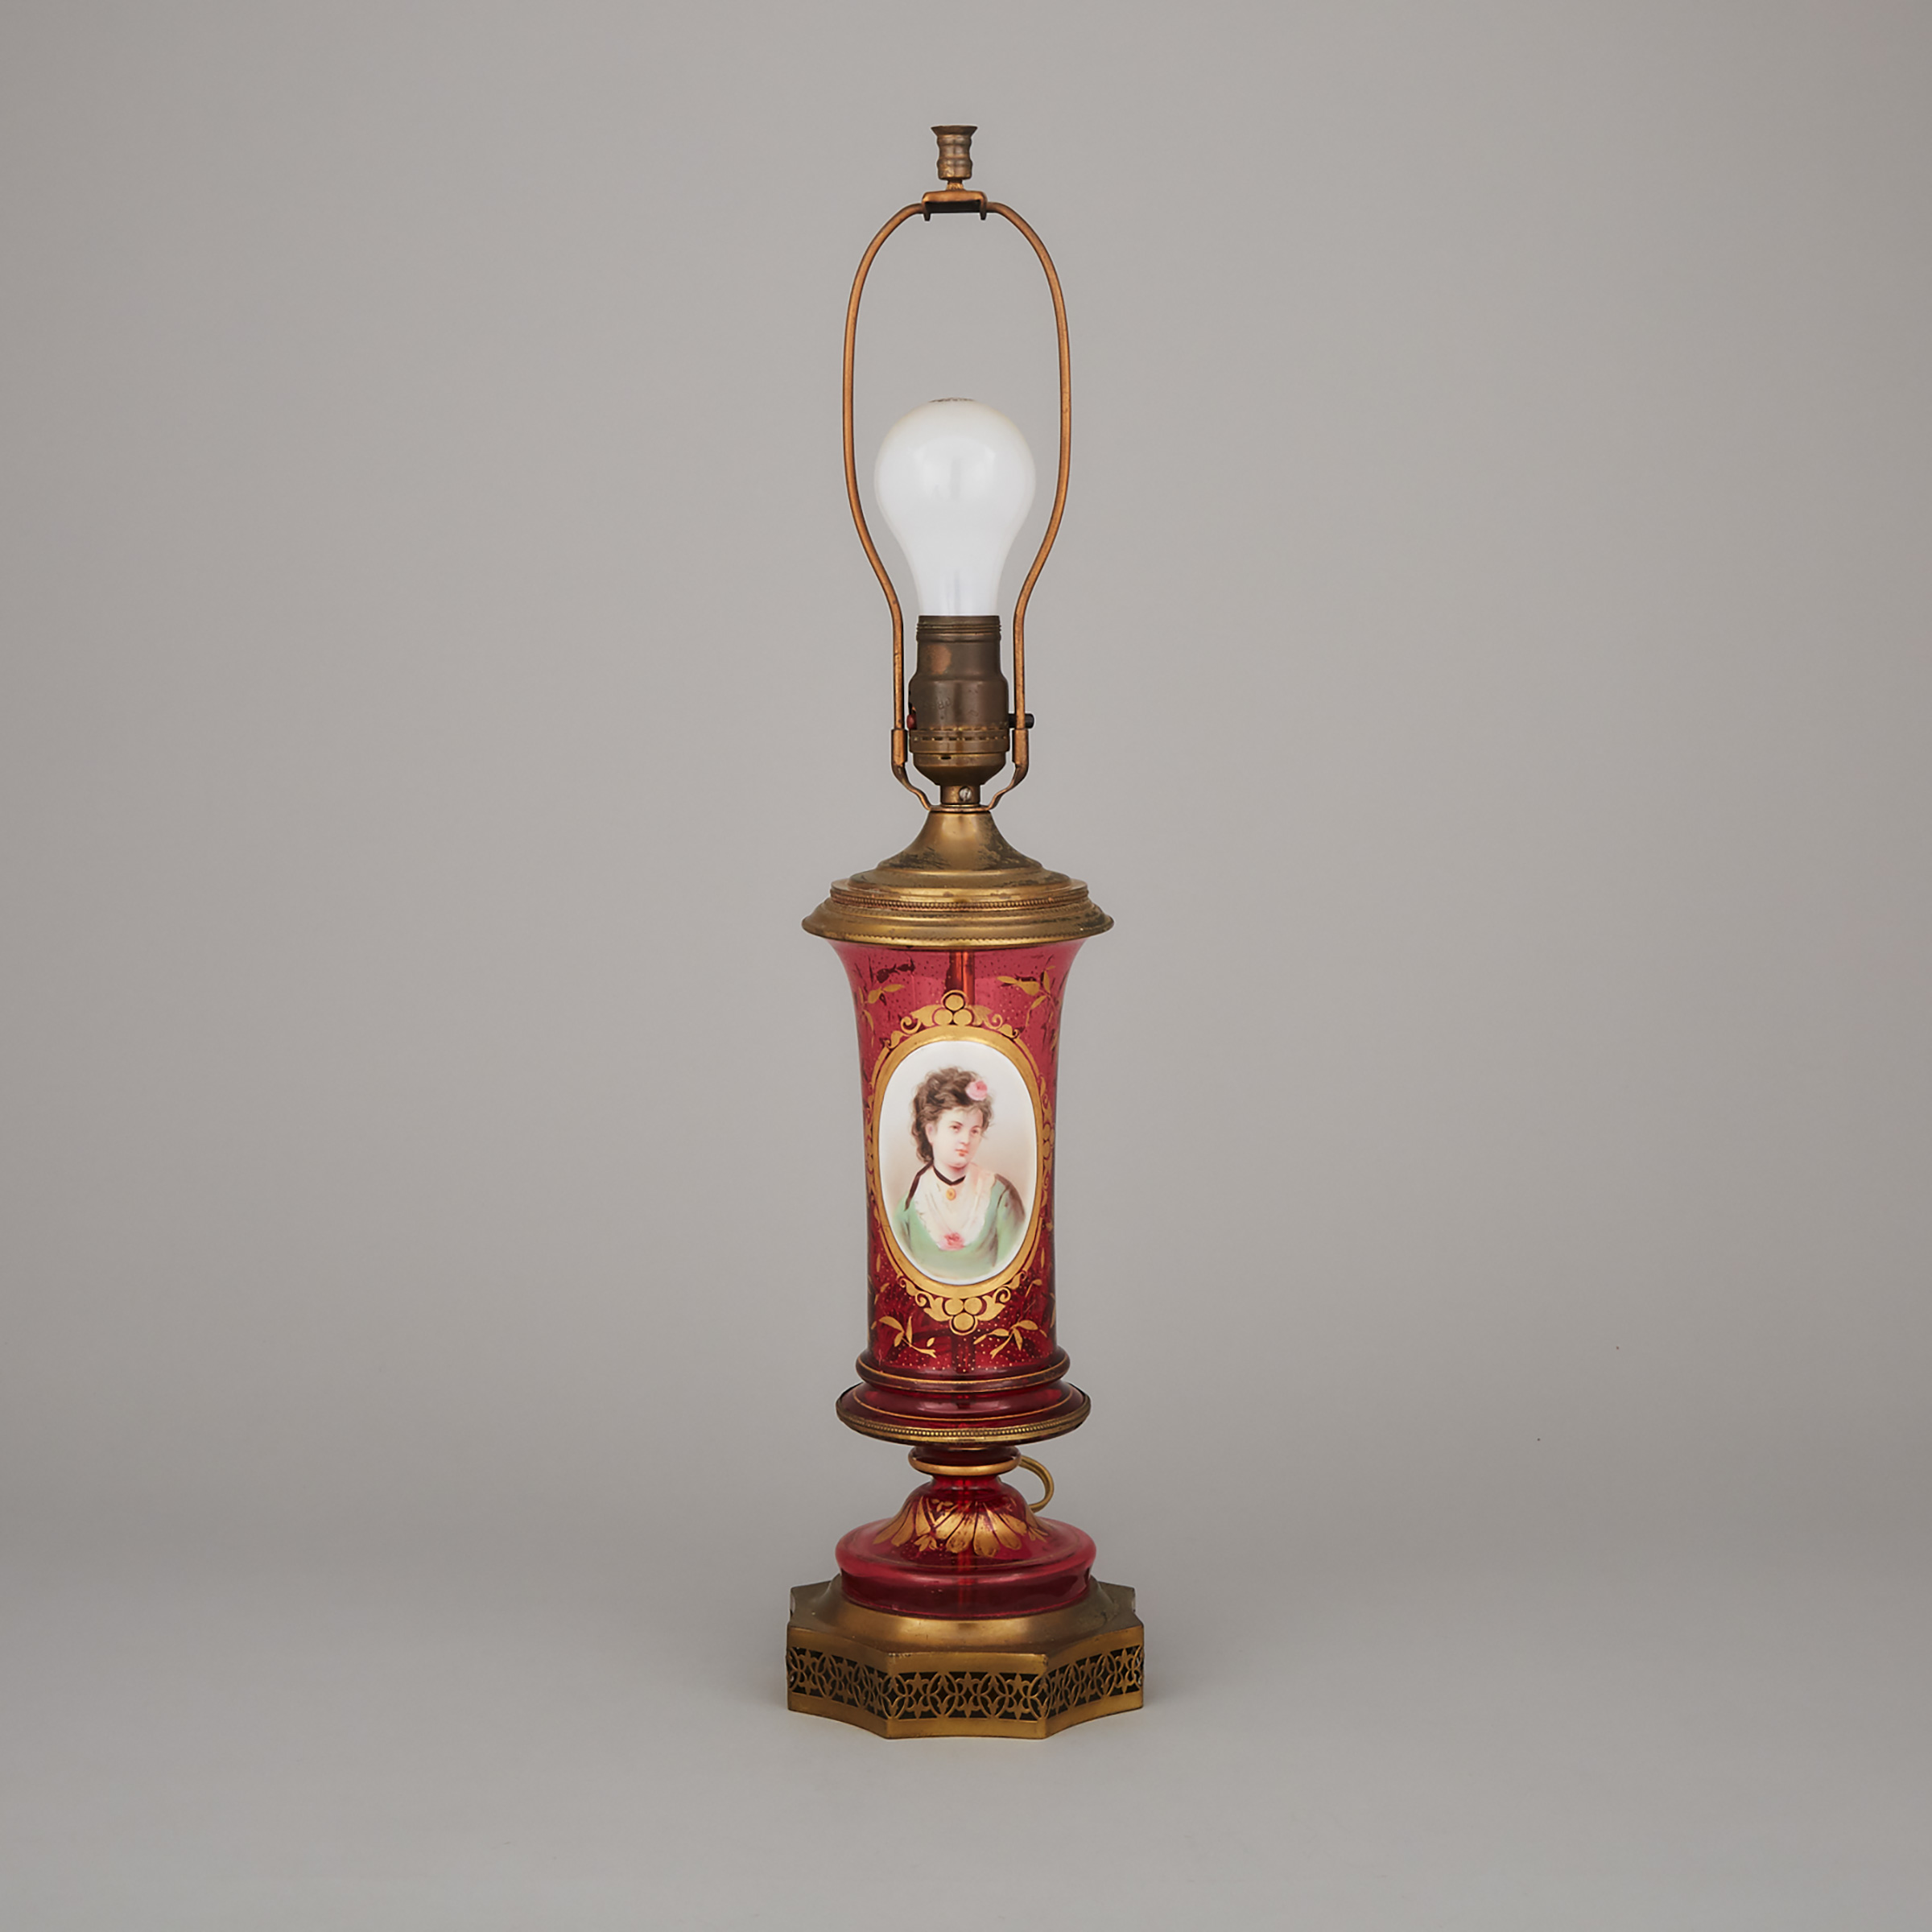 Bohemian Overlaid, Enameled and Gilt Red Glass Portrait Table Lamp, late 19th century